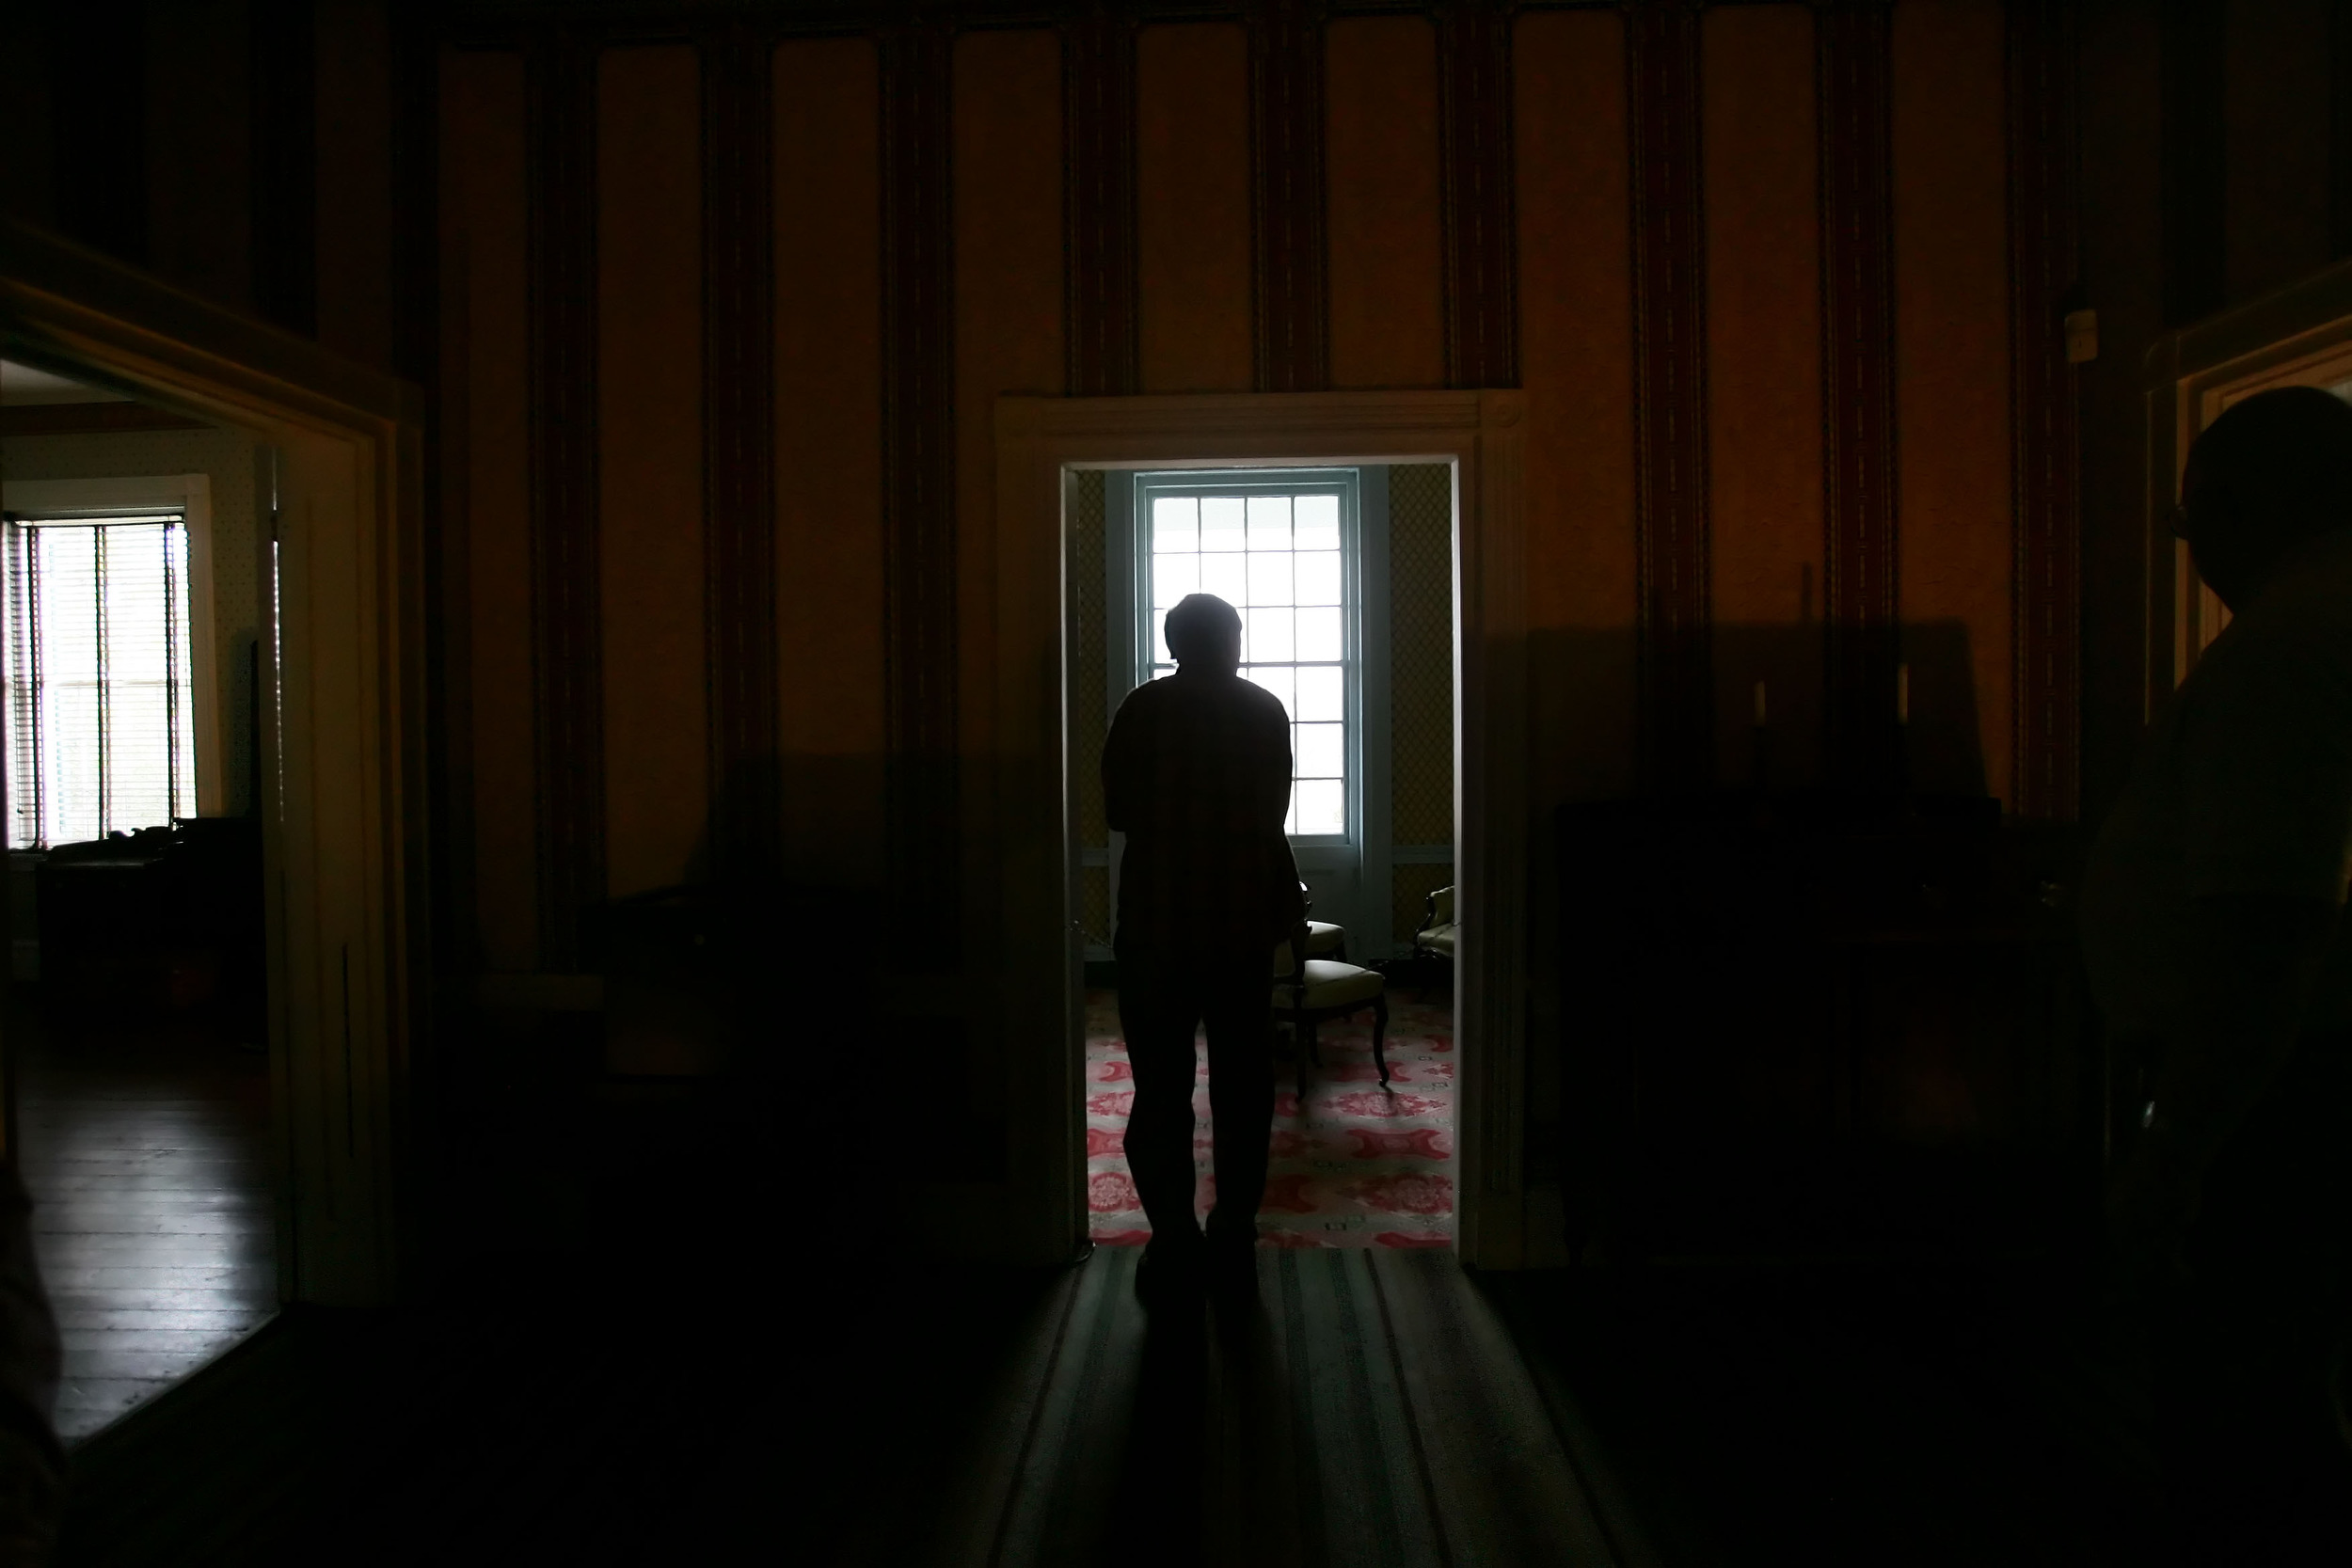  Visitors tour Carnton plantation, a civil war era house that became a field hospital during the Battle of Franklin, called the bloodiest five hours of the civil war. Blood and ether stains are soaked into the old wooden floors of the house Thursday,